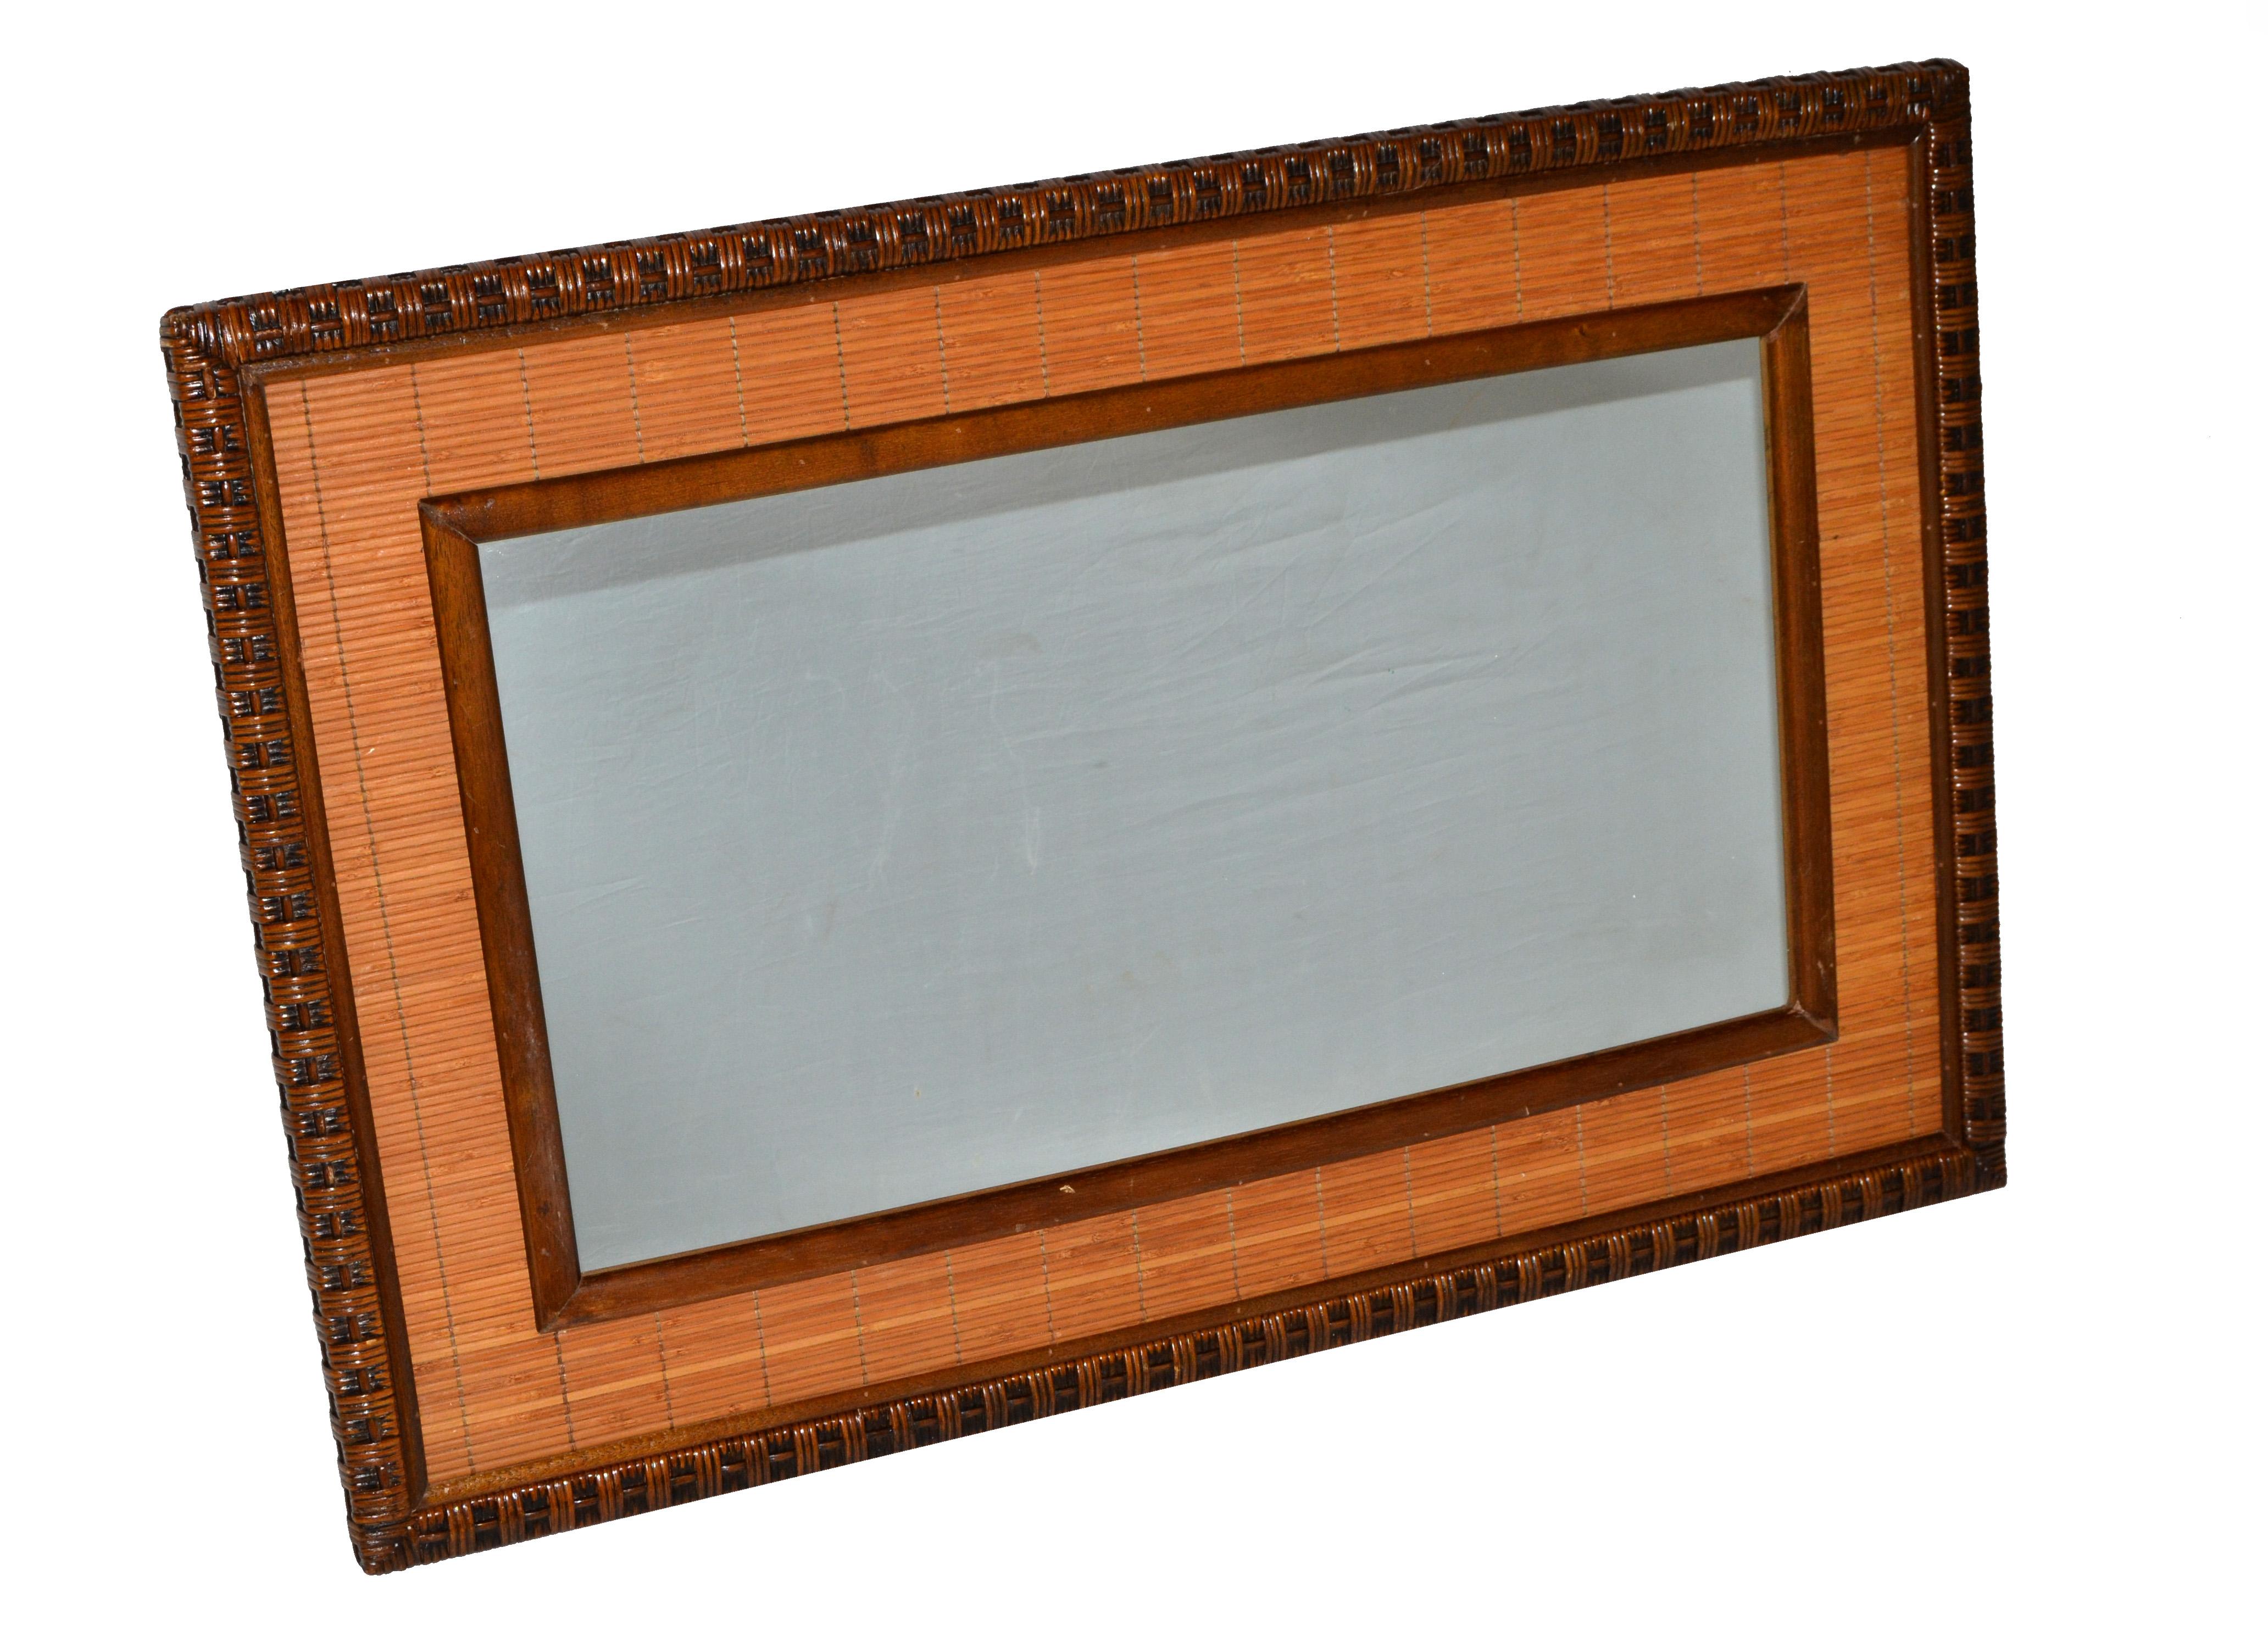 Hand-Woven Rectangle Mid-Century Modern Handwoven Rattan Wicker Wall Mirror Boho Chic 1979 For Sale